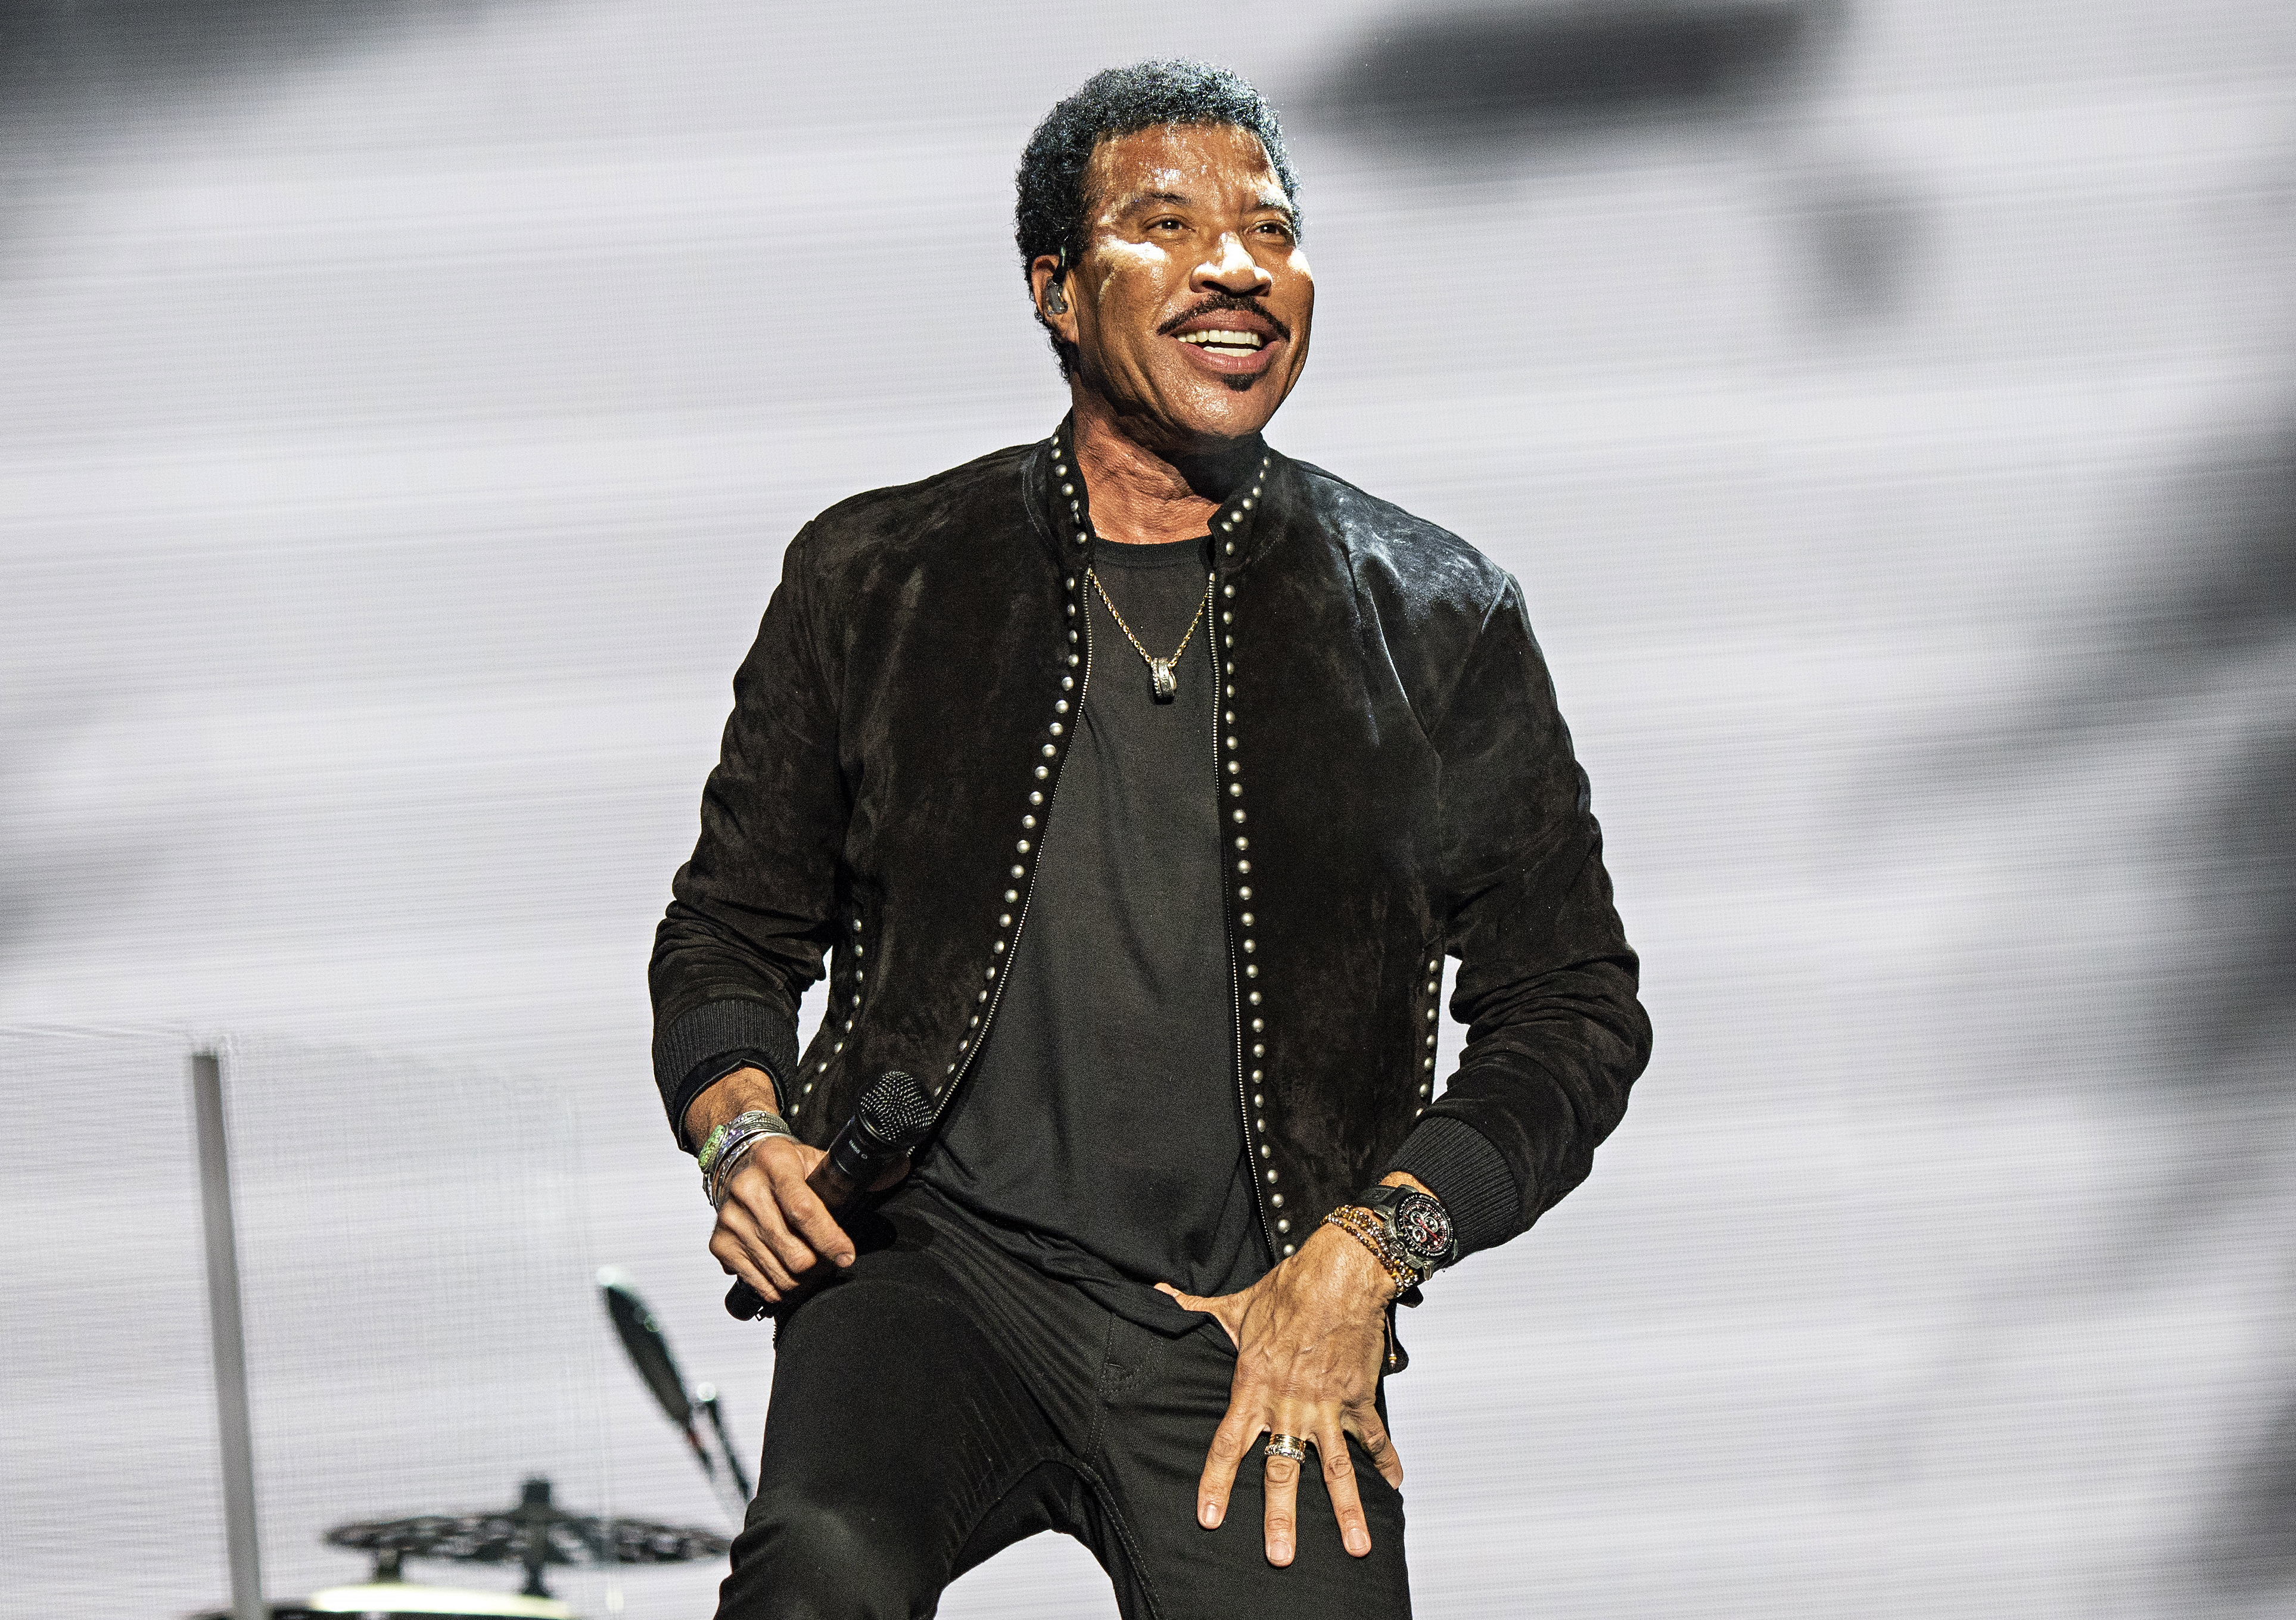 Lionel Richie performs at KAABOO Texas in Arlington, Texas on May 10, 2019.